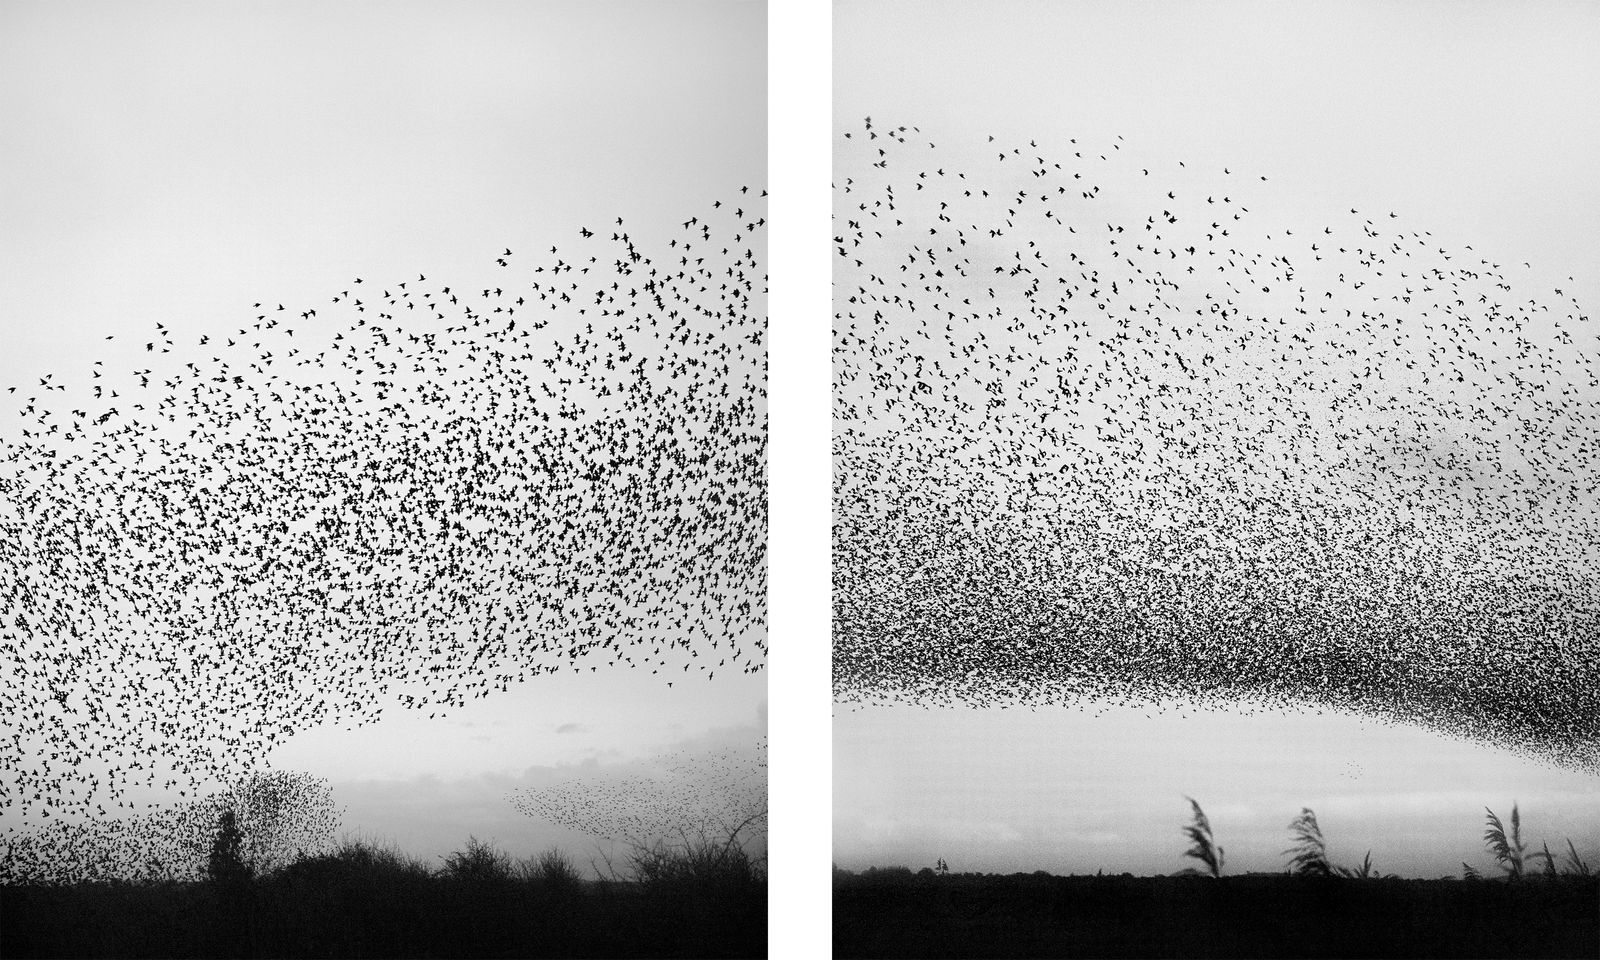 © Billy Barraclough - Image from the Murmurations photography project